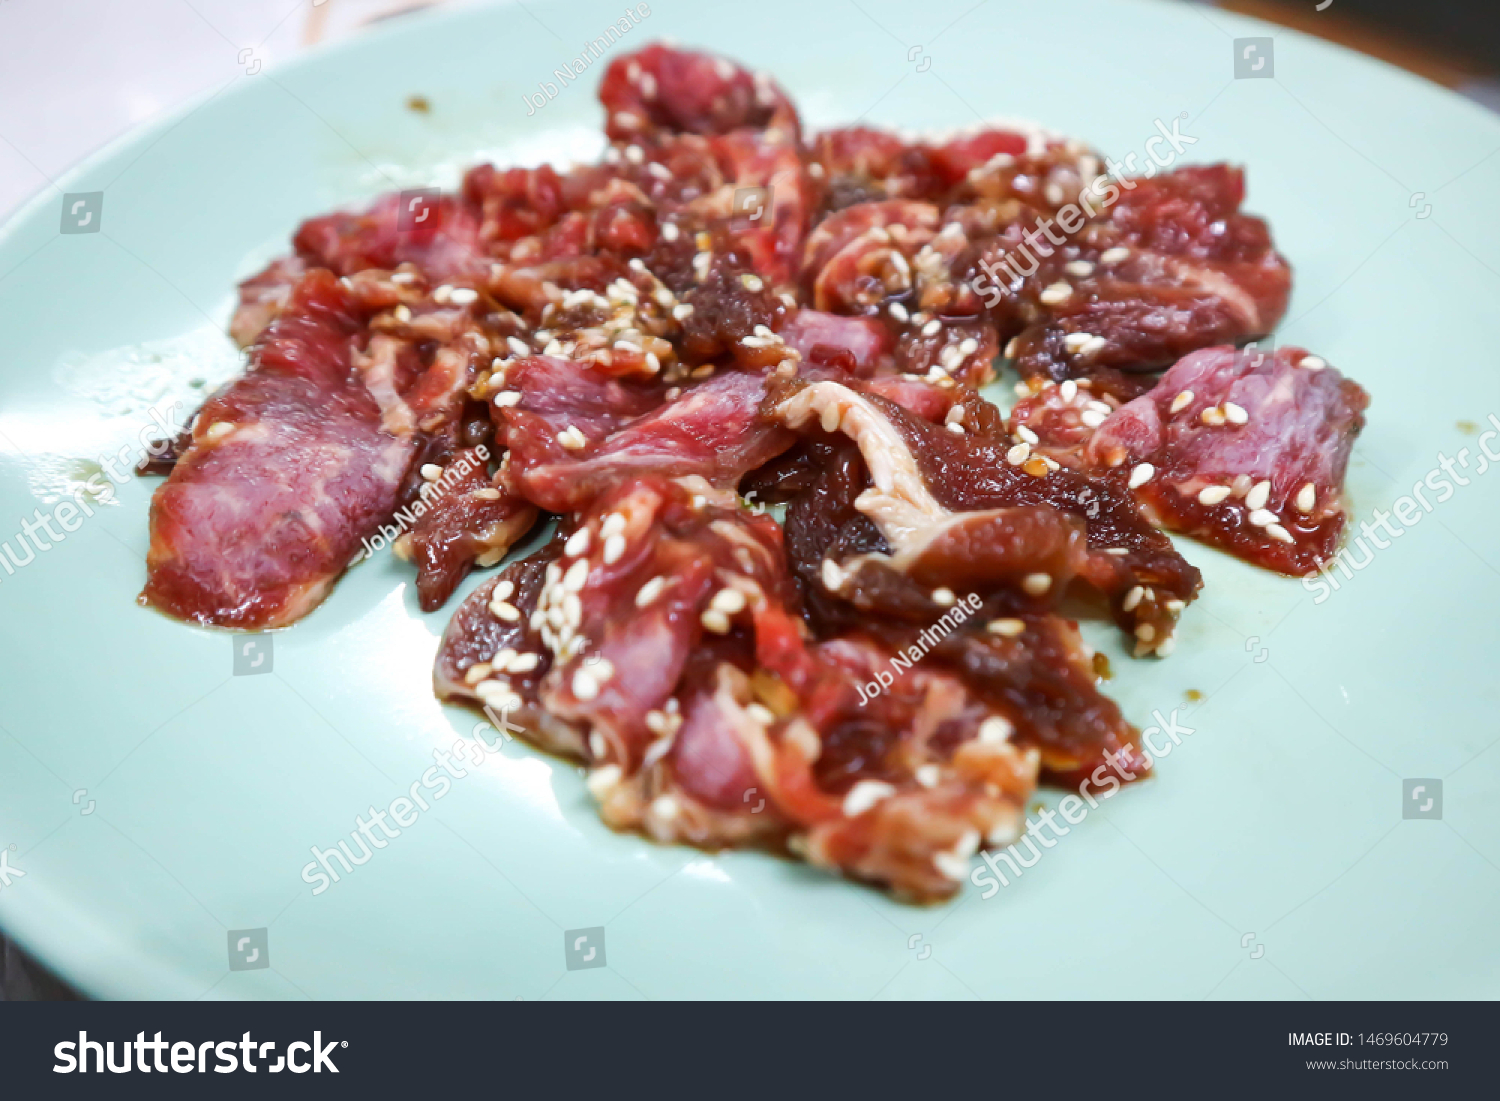 pickle beef, raw beef or raw meat #1469604779